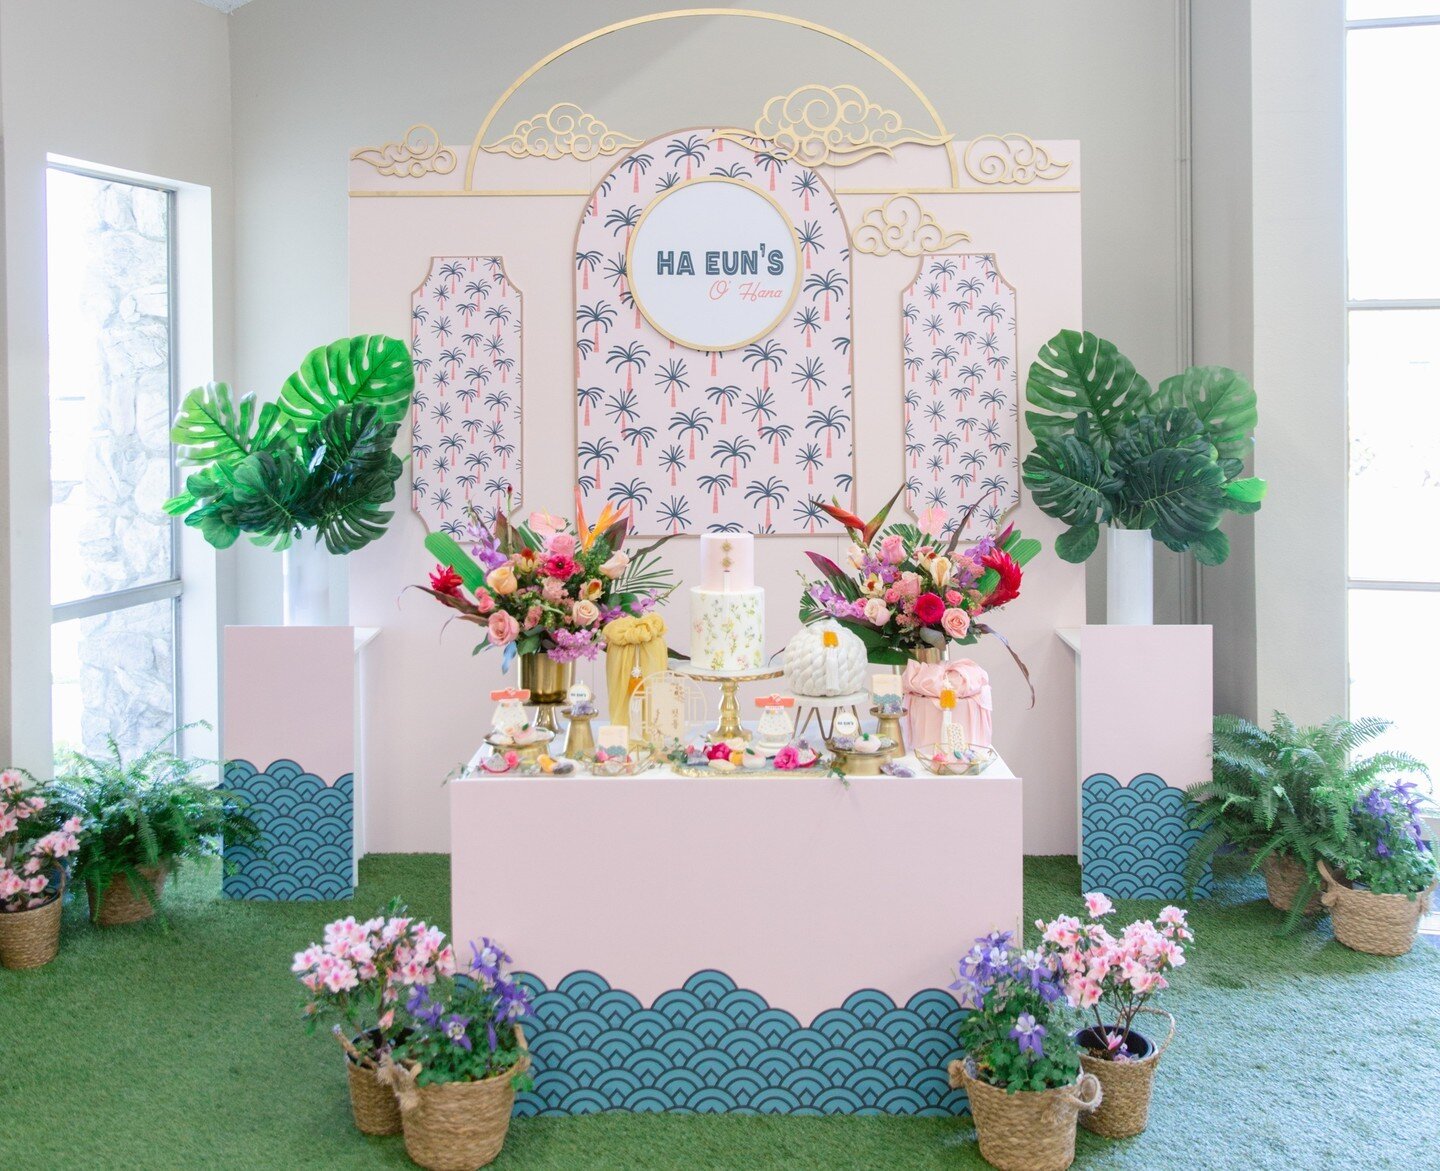 Brynn puts the 'hana' in 'ohana'! Celebrating her first birthday with a mix of Korean tradition and Hawaiian flair!!!⁠
.⁠
.⁠
Credit where credit is due:⁠
Design/ planning: @Skymeadowplace⁠
Photographer: @my_dear_adelynn_photography⁠
Printed foamboard